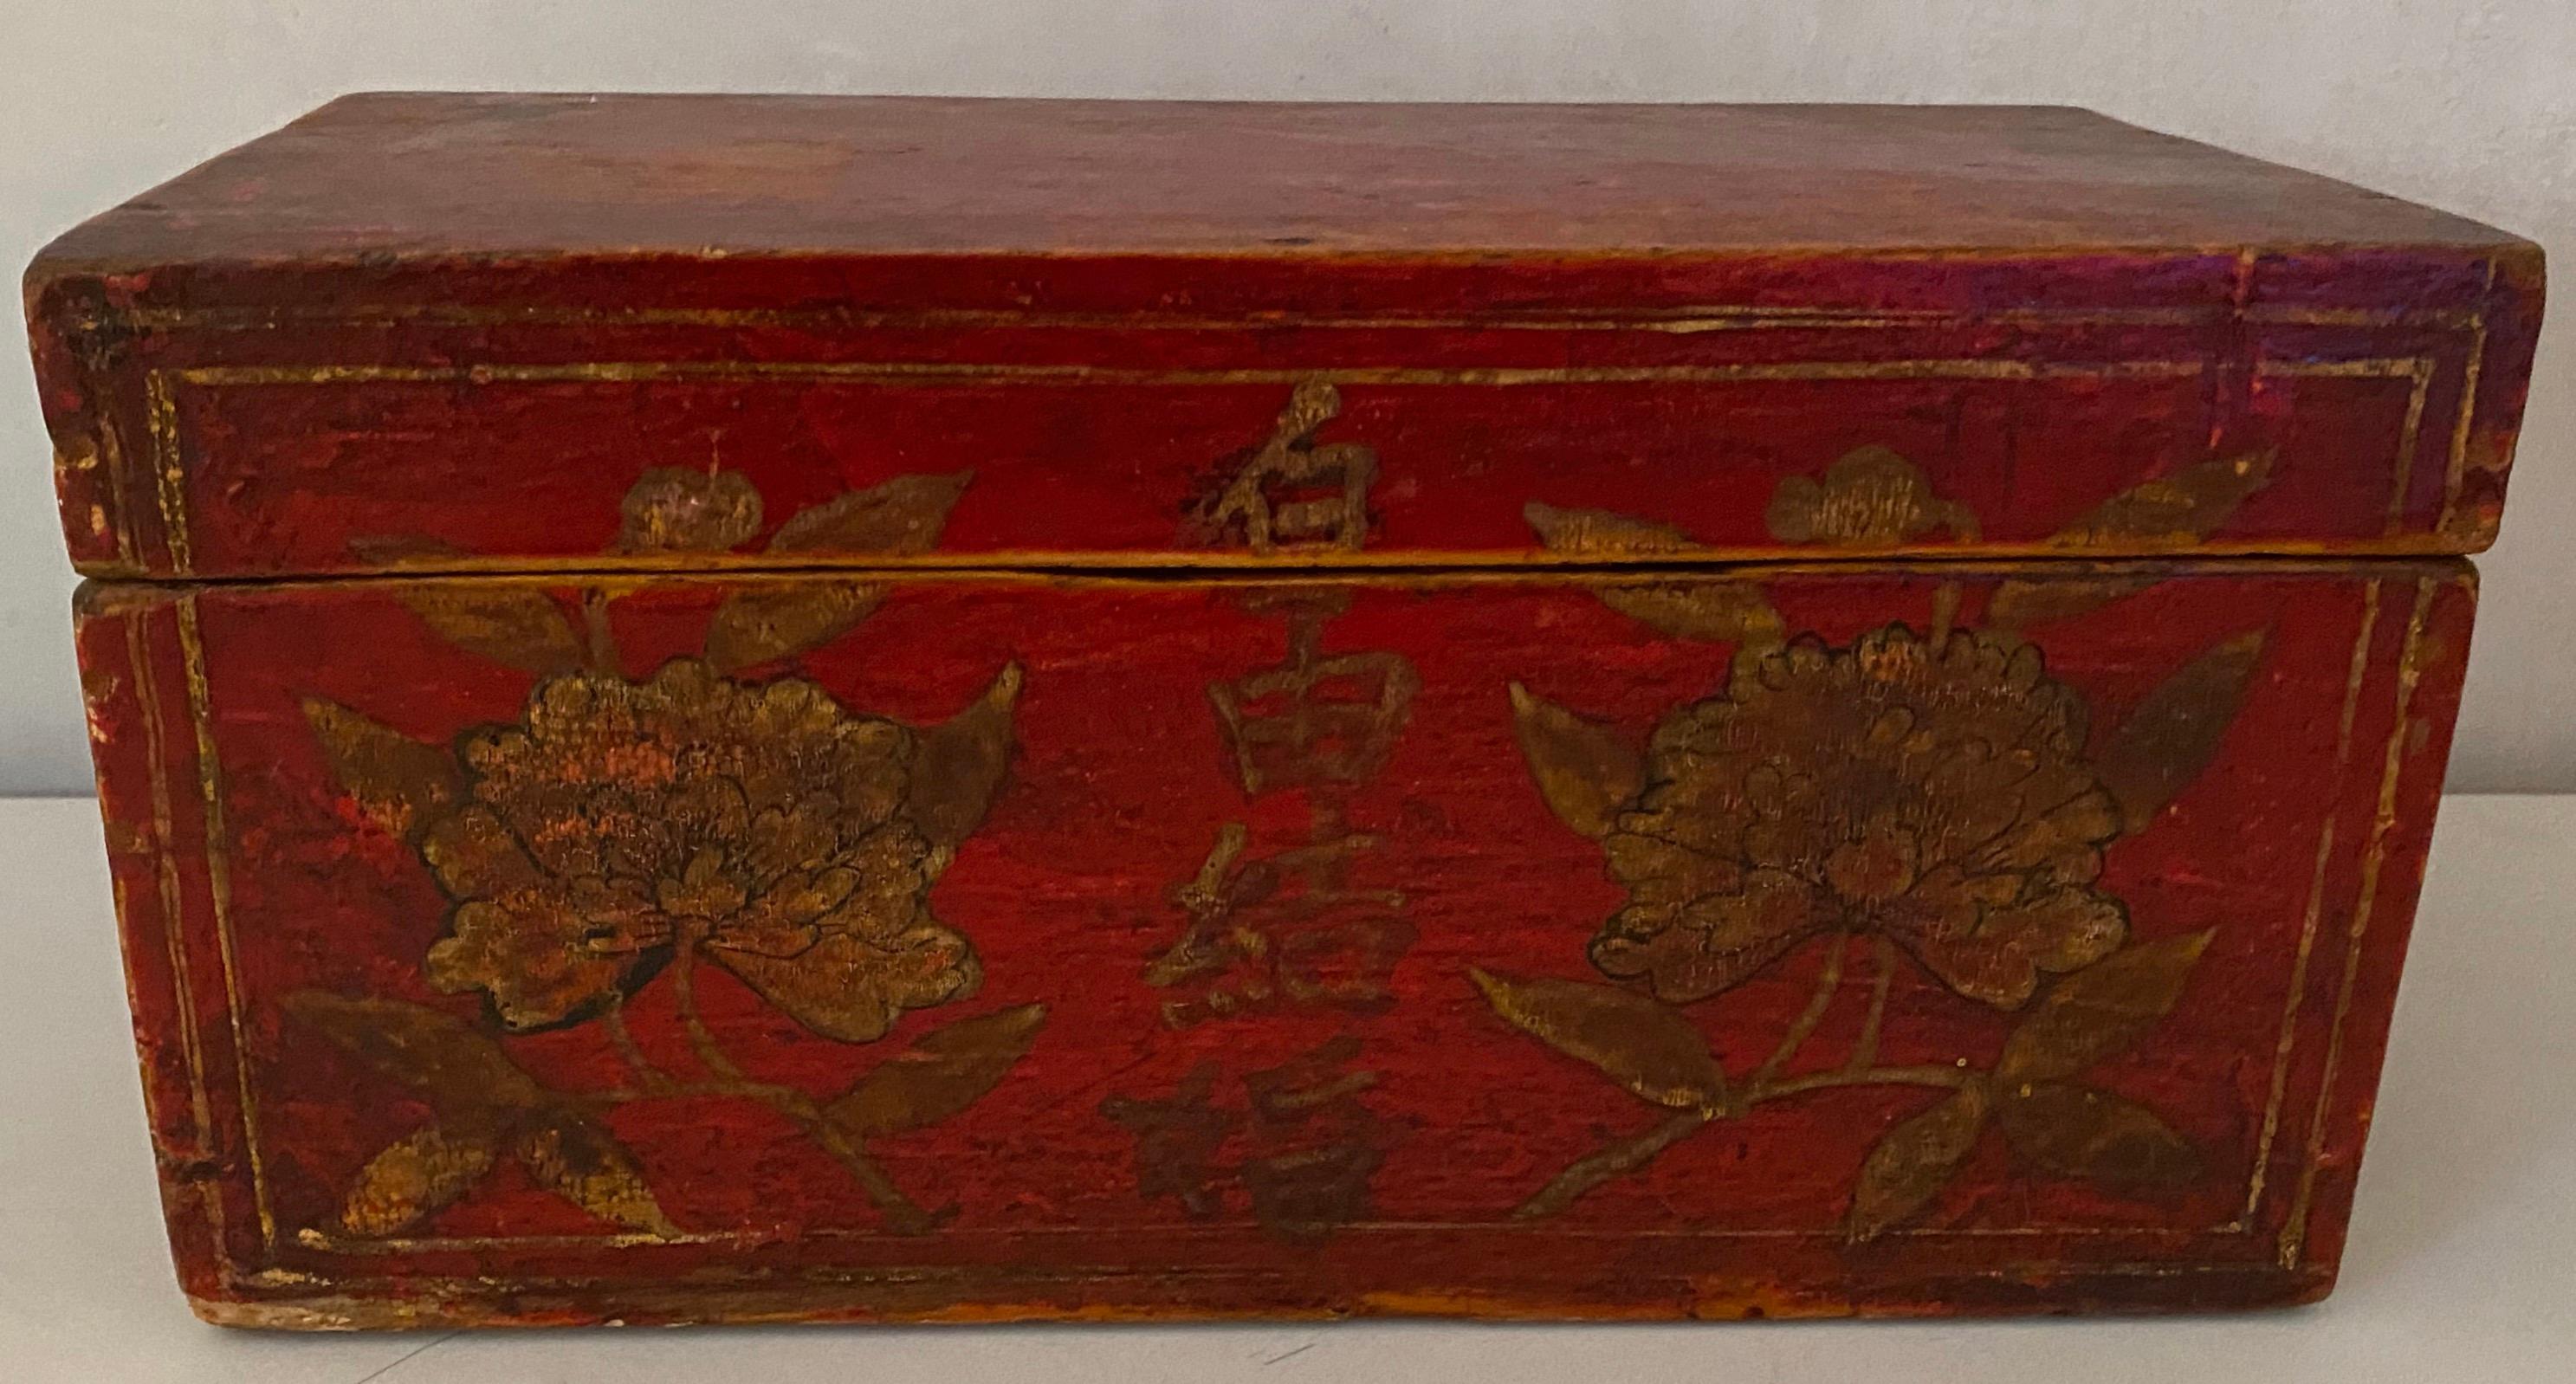 This beautiful small antique Chinese hand painted wooden box is a traditional bridal box.  The family of the bride fills the box with jewelry for their daughter to bring to her new home.  The literal translation of the 4 characters on the box is